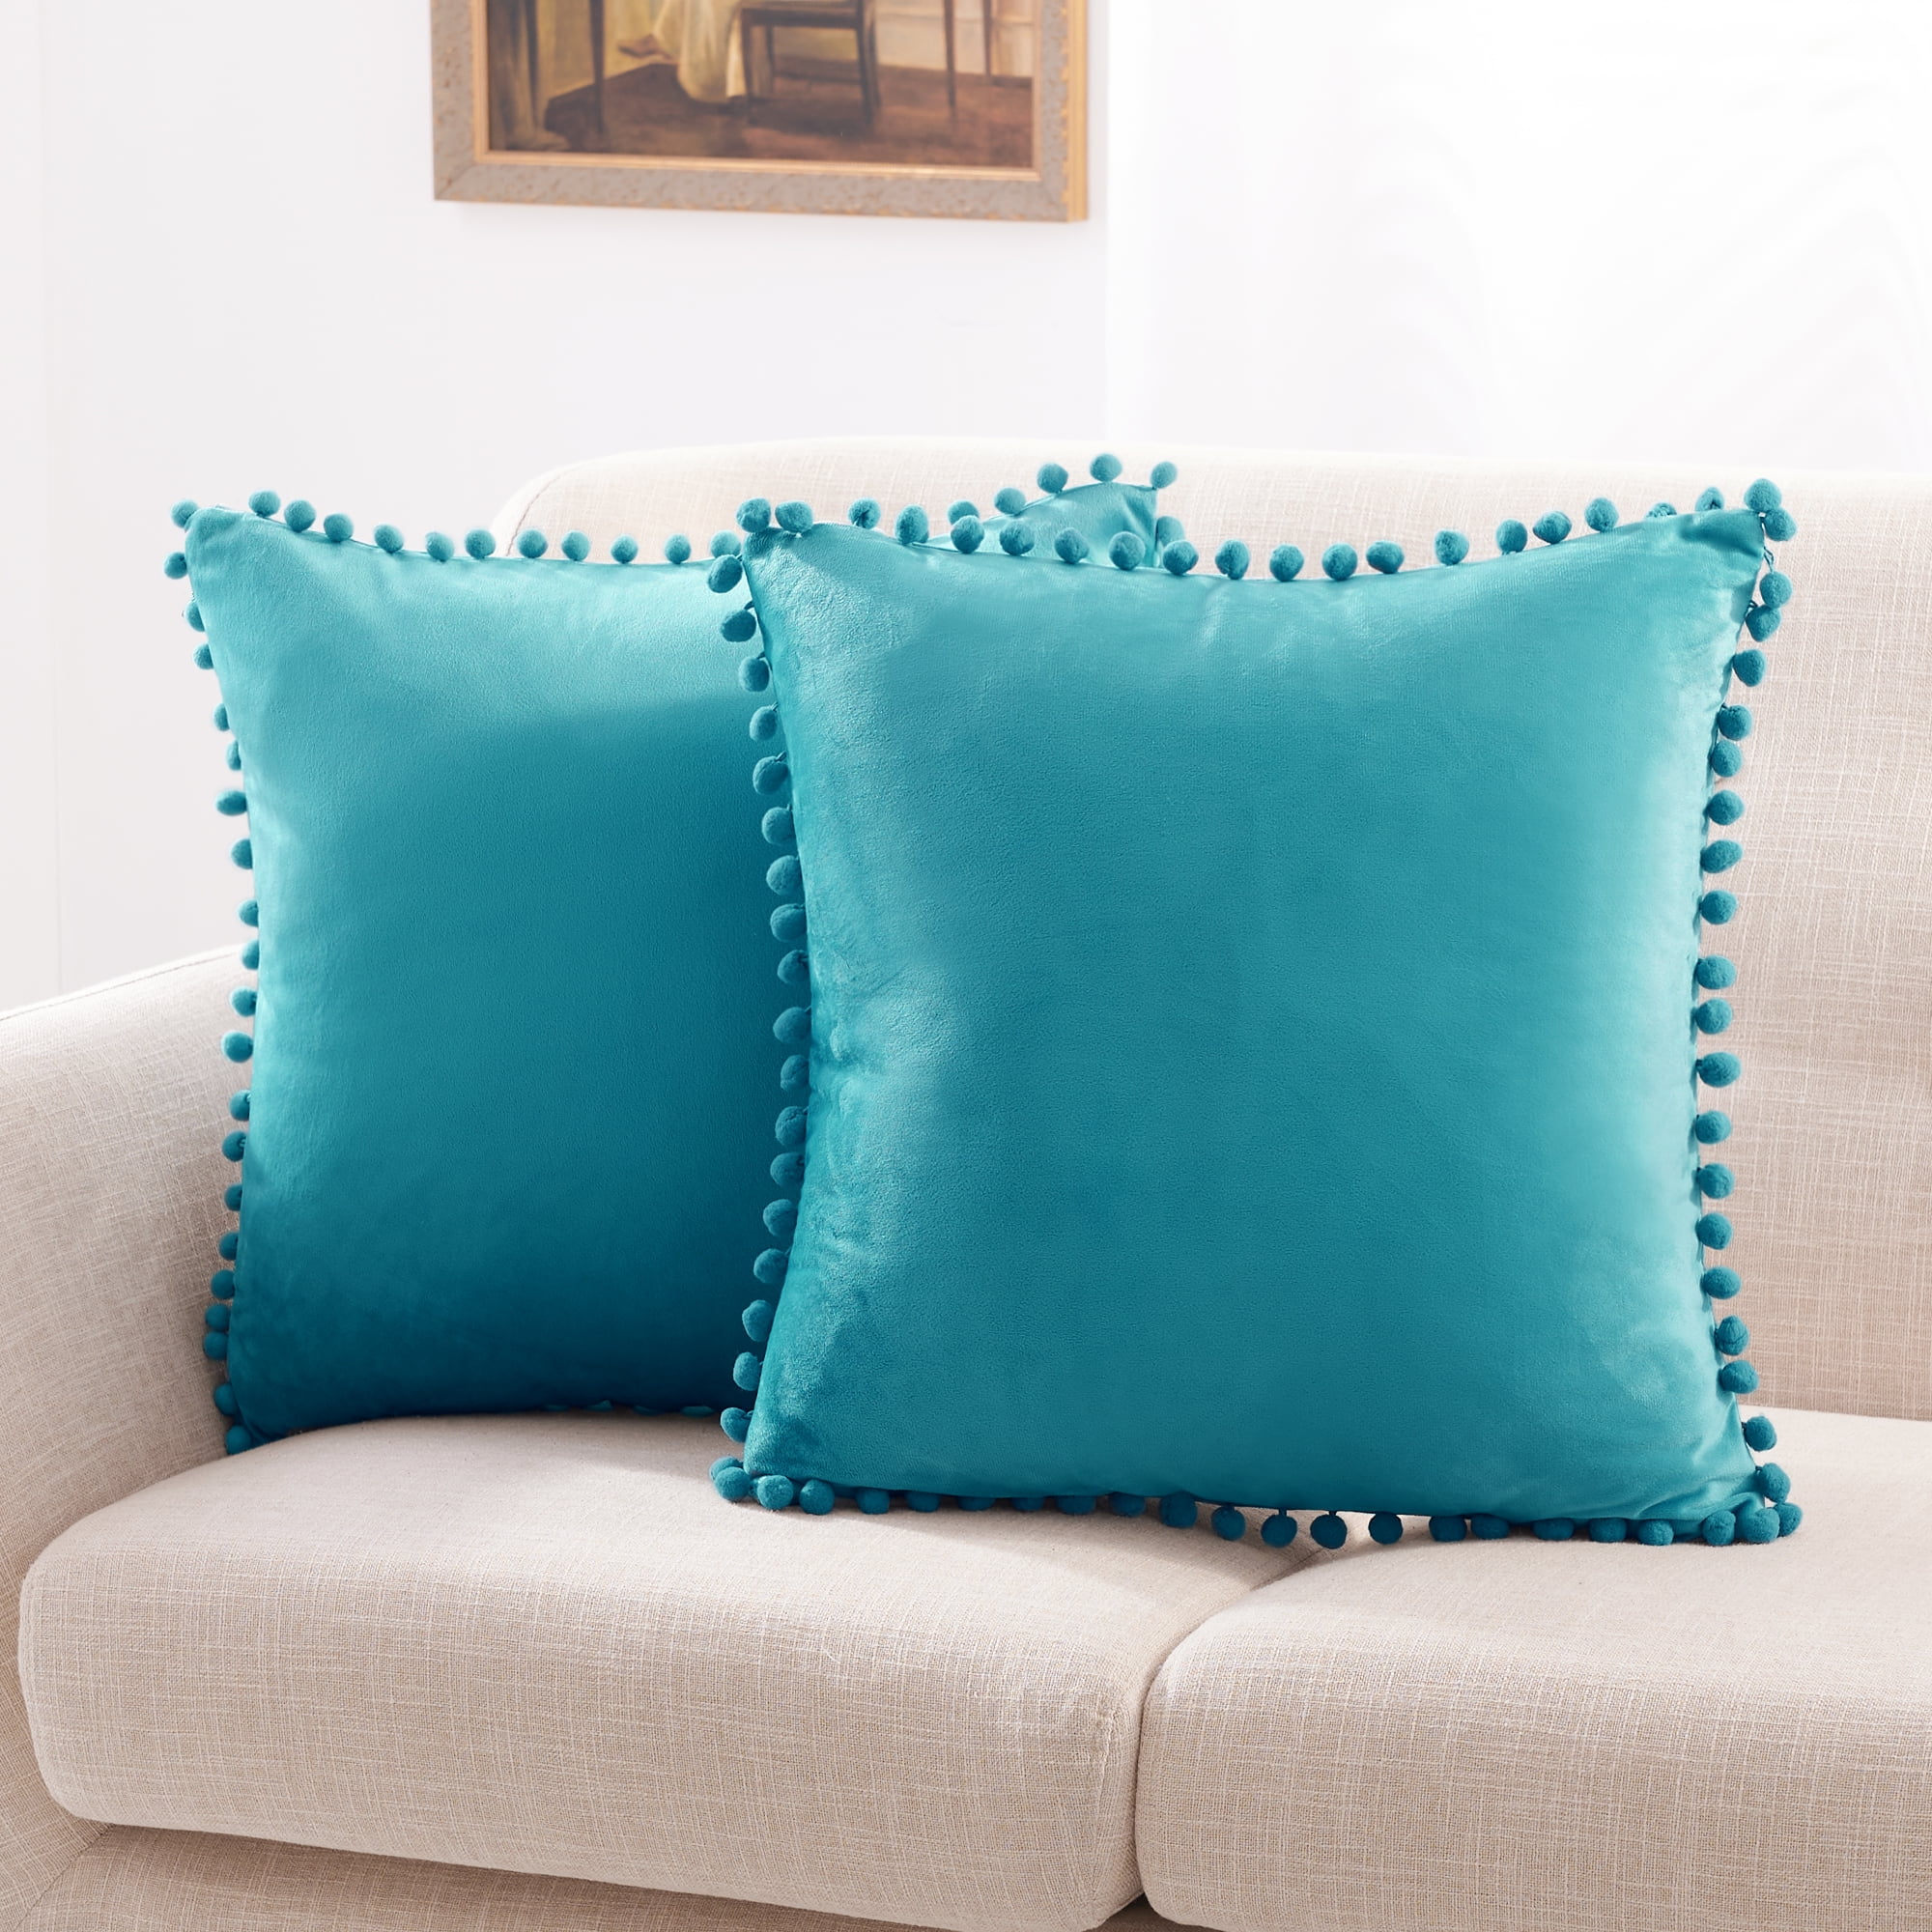 Deconovo Pack Of 2 Decorative Pom Poms, Zippered Leather Couch Cushion Covers